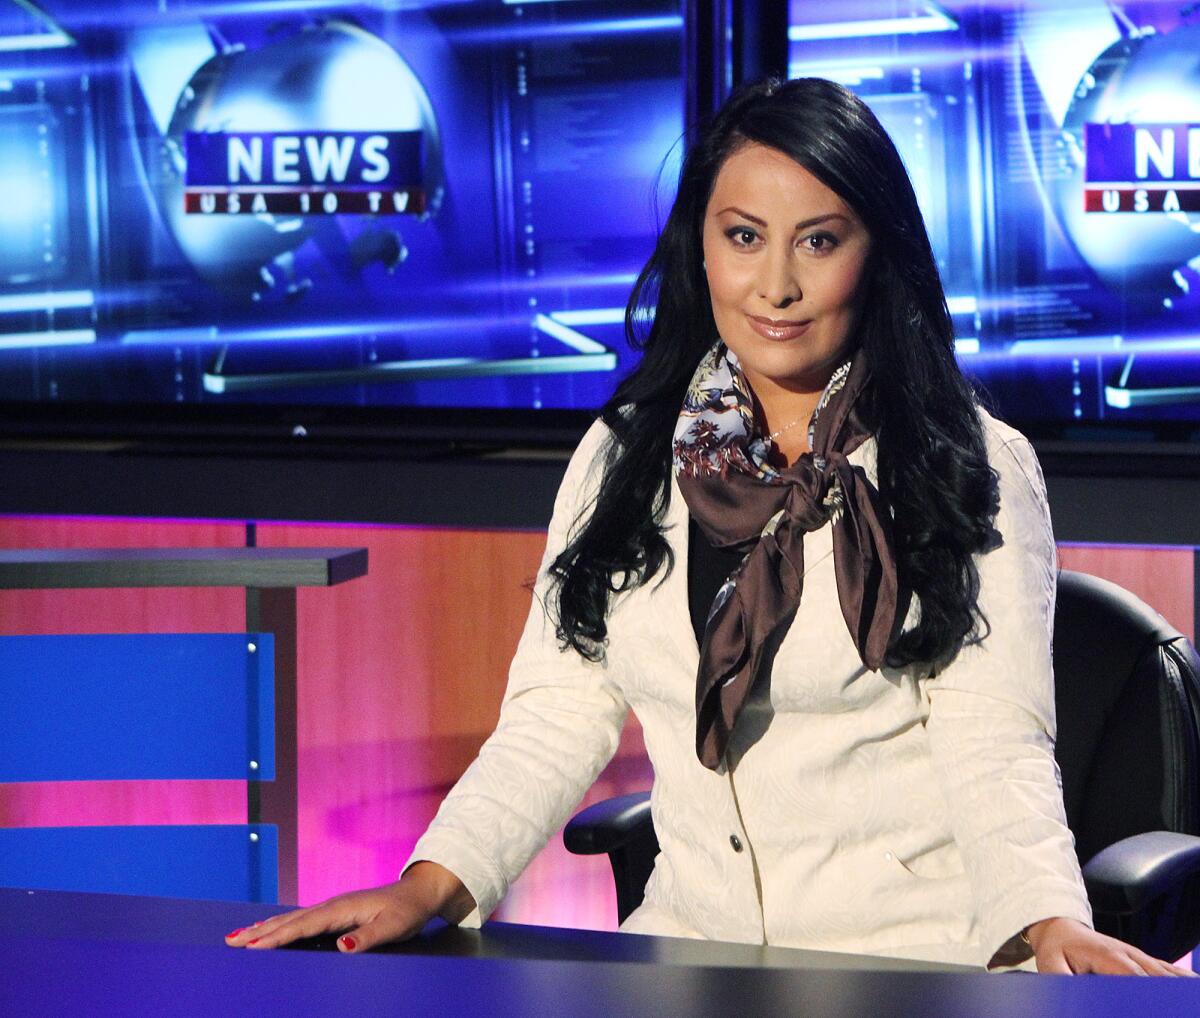 Armine Amiryan, head of the news department at USArmenia Worldwide Armenian Television in studio in Tarzana on Wednesday, Oct. 2, 2013. The station recently purchased property in Glendale and plans to relocate soon from Tarzana.